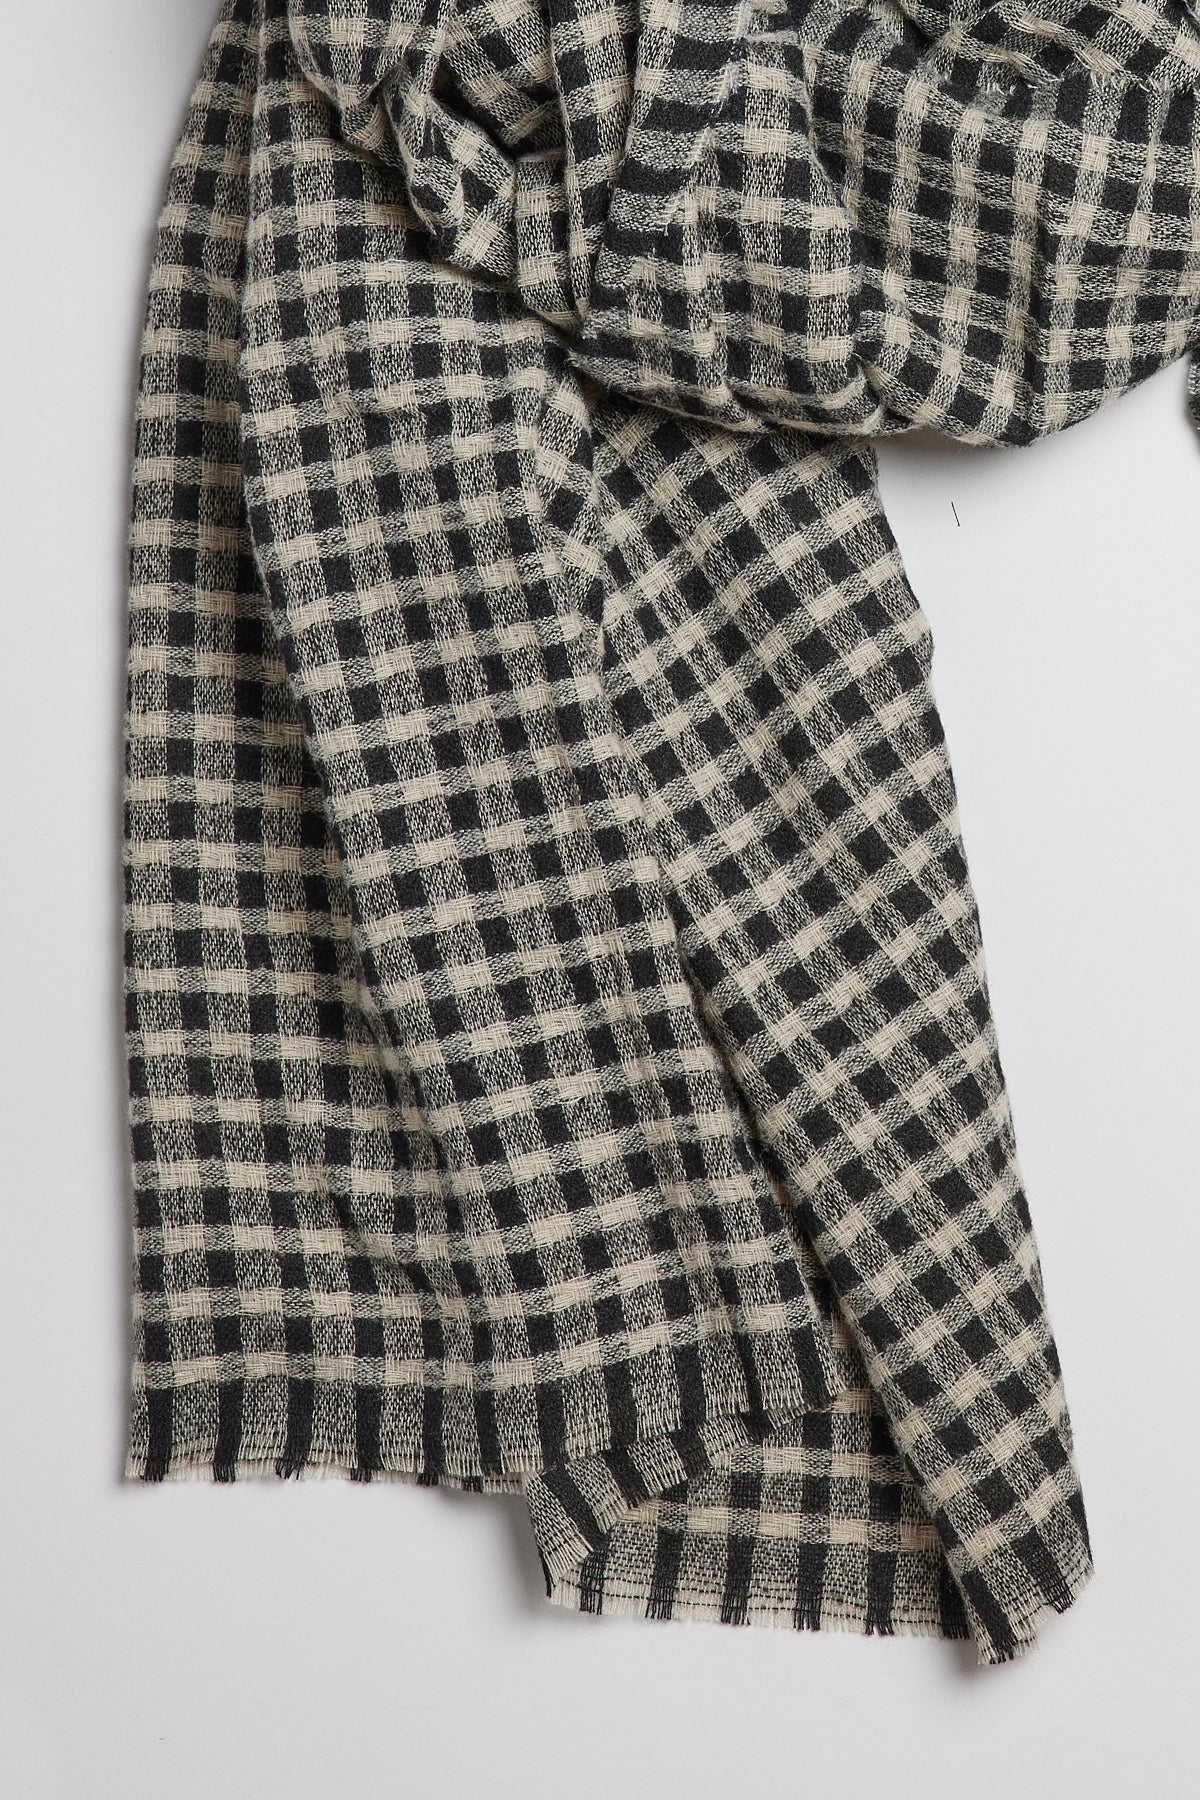 Bicolor Check Scarf in black and ivory fabric detail-26749448061121